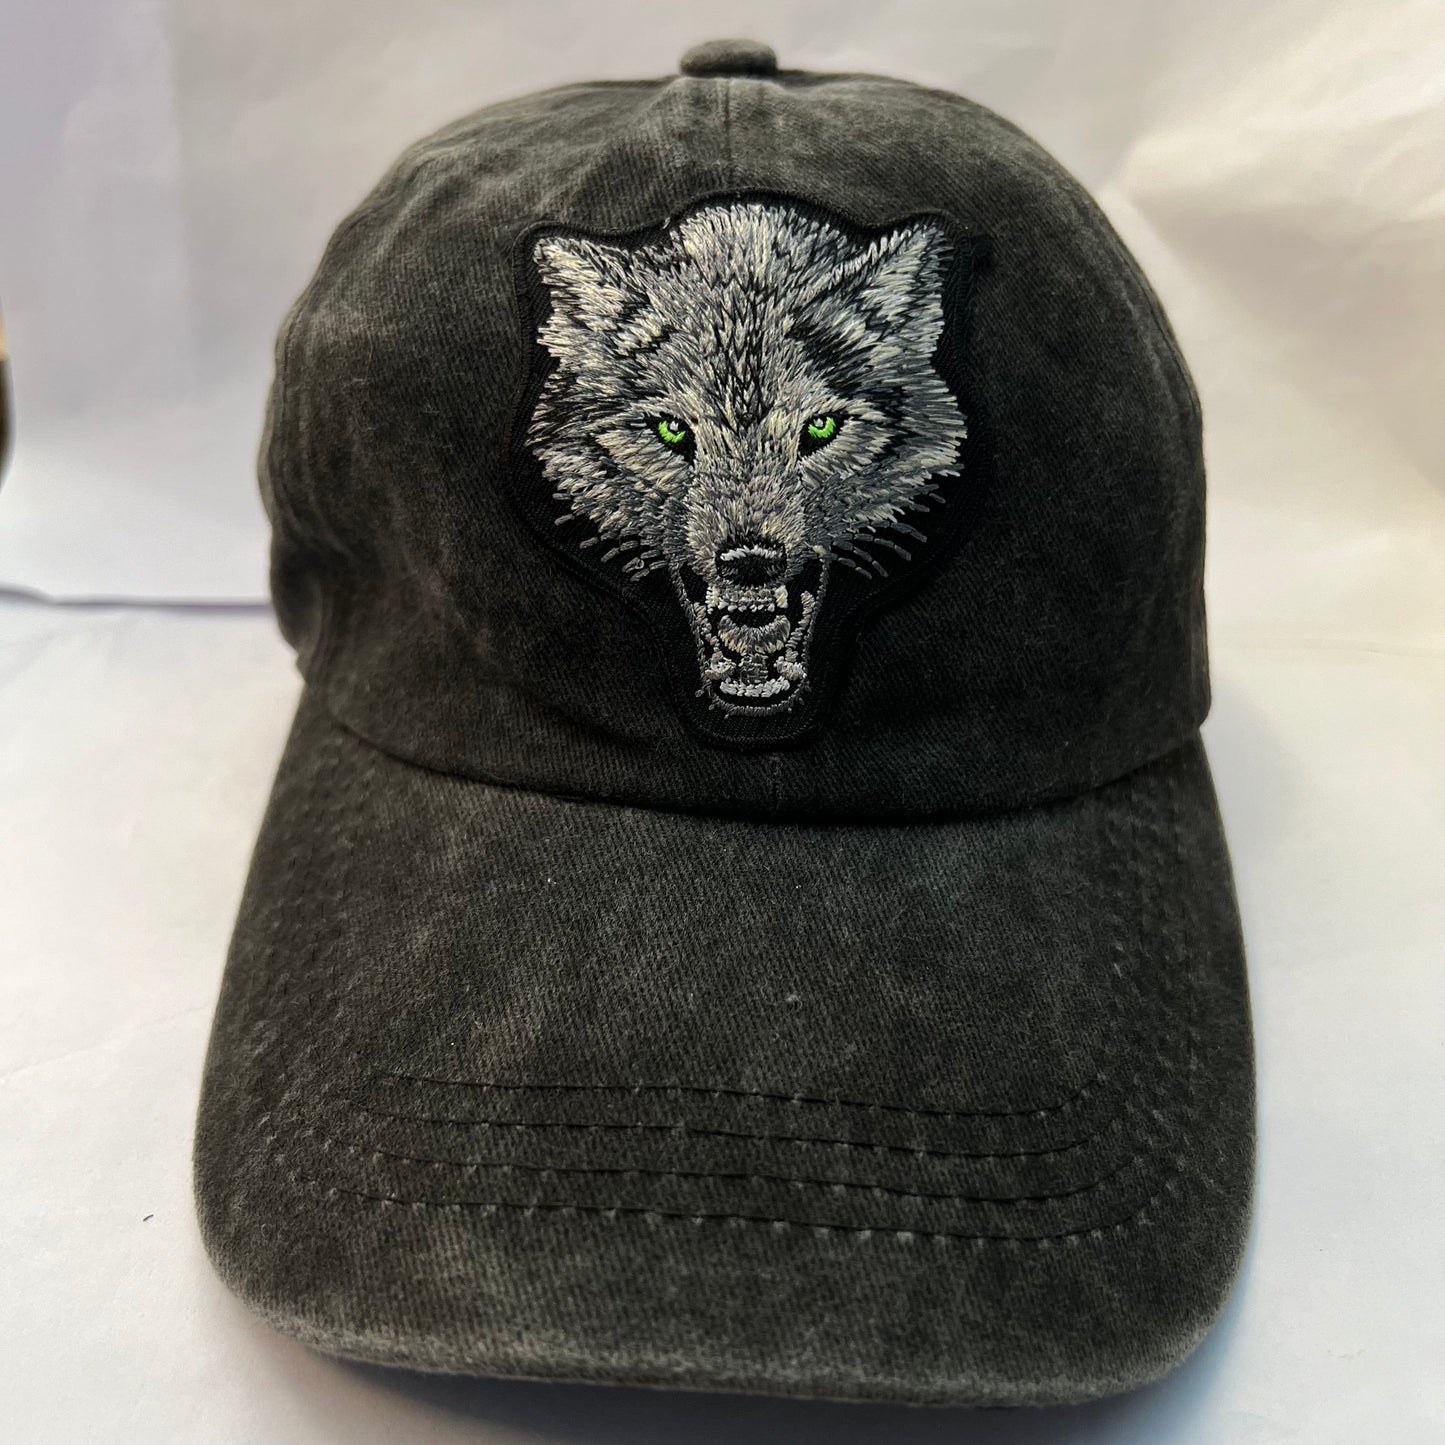 Black Baseball Hat Grey Wolf Embroidered Patch on Cap one size